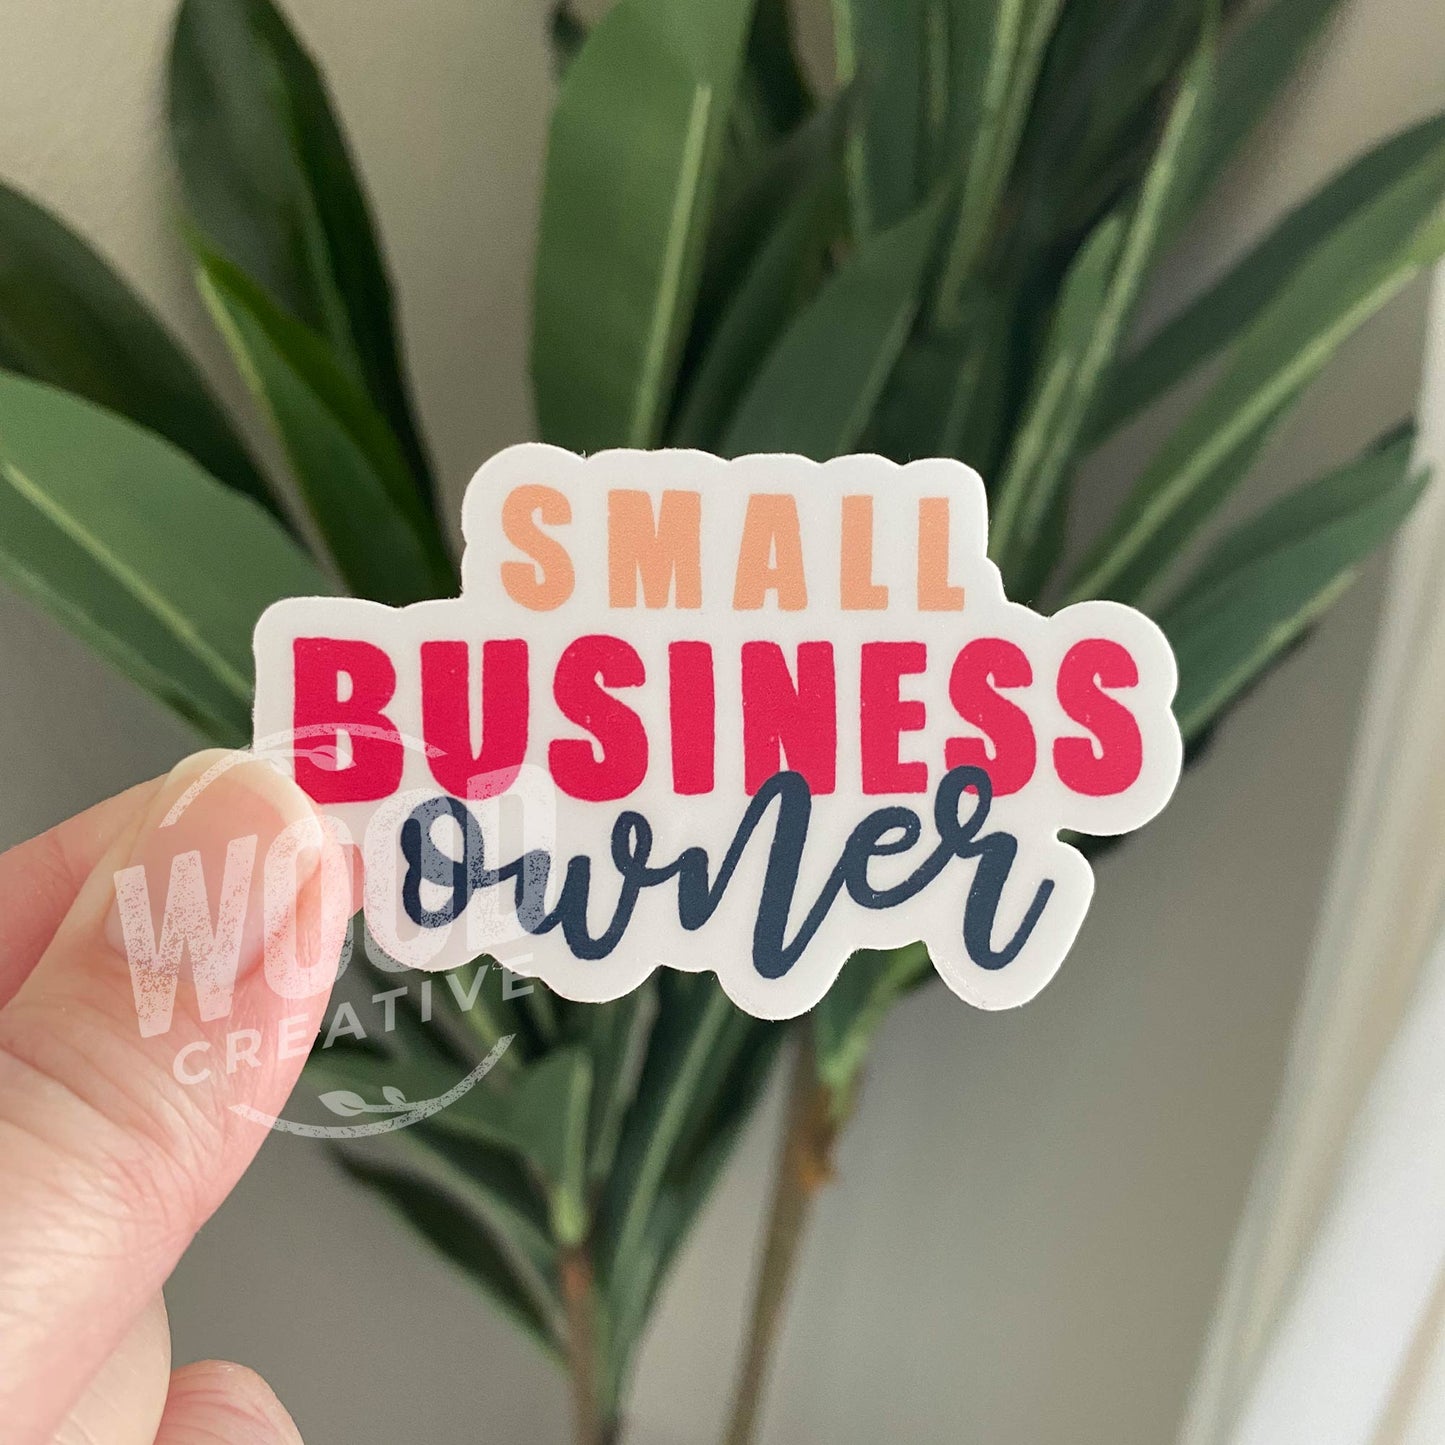 Small Business Owner High Quality Vinyl Sticker